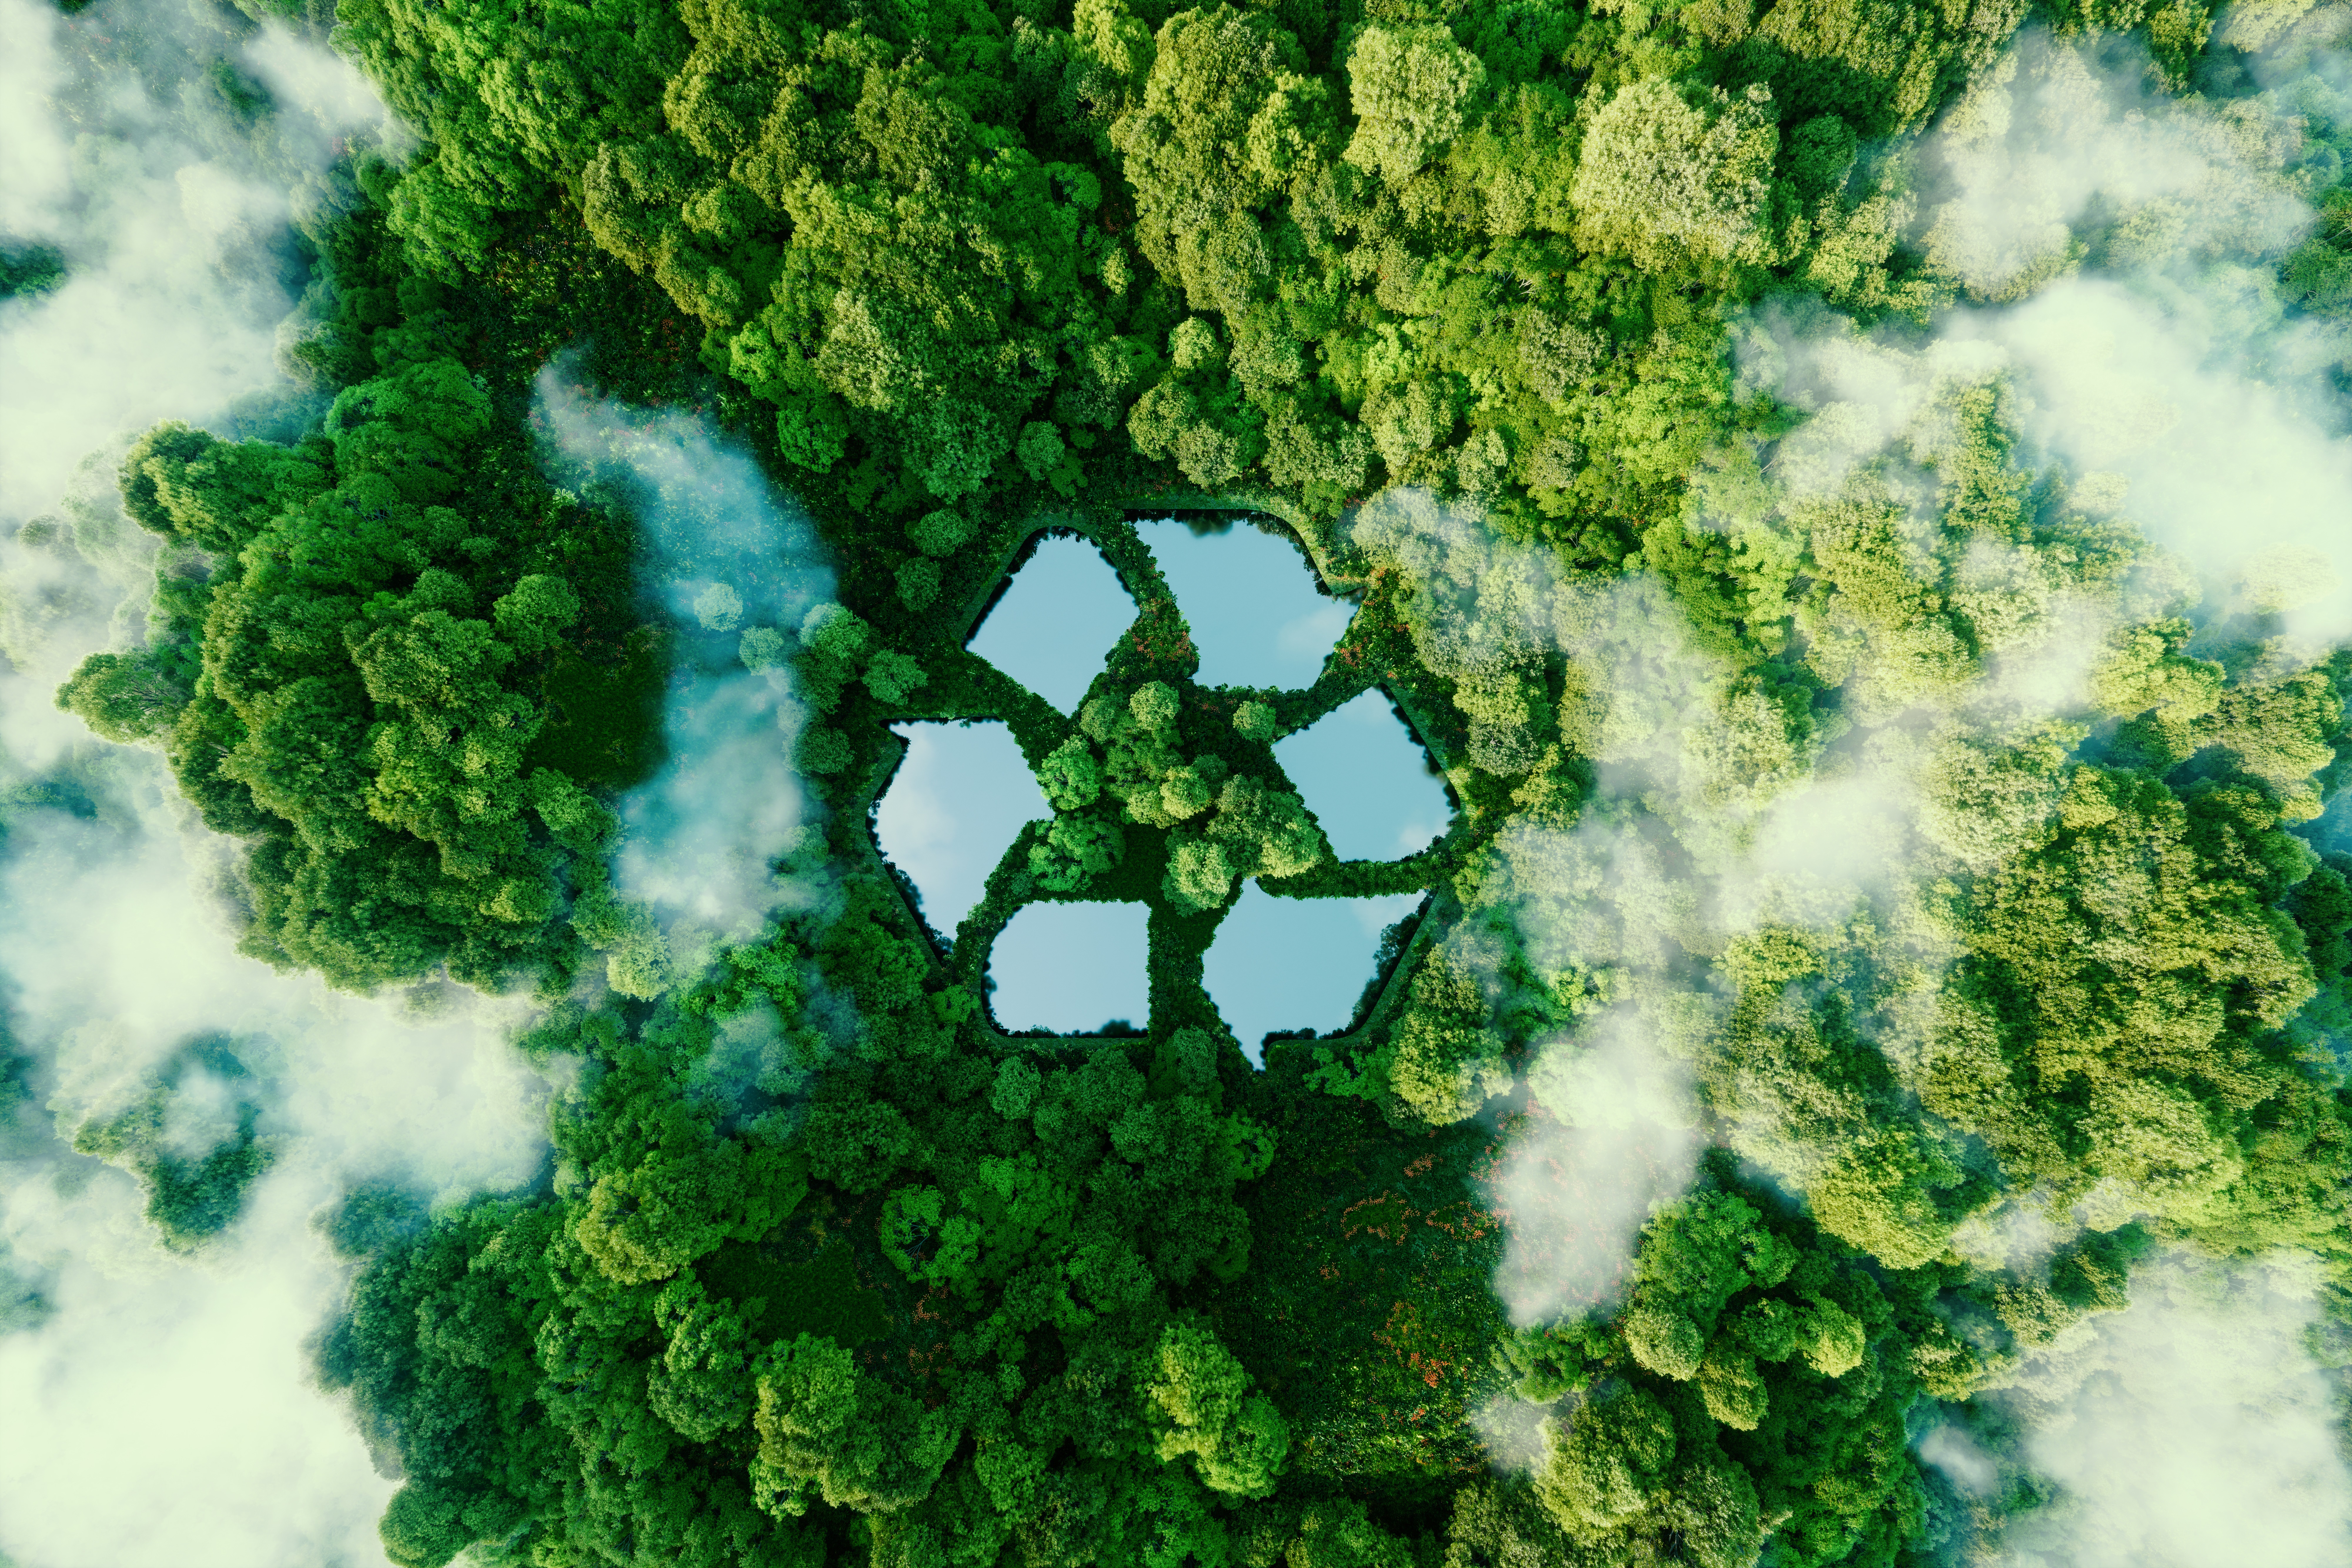 the recycling symbol overlaid on a forest from above